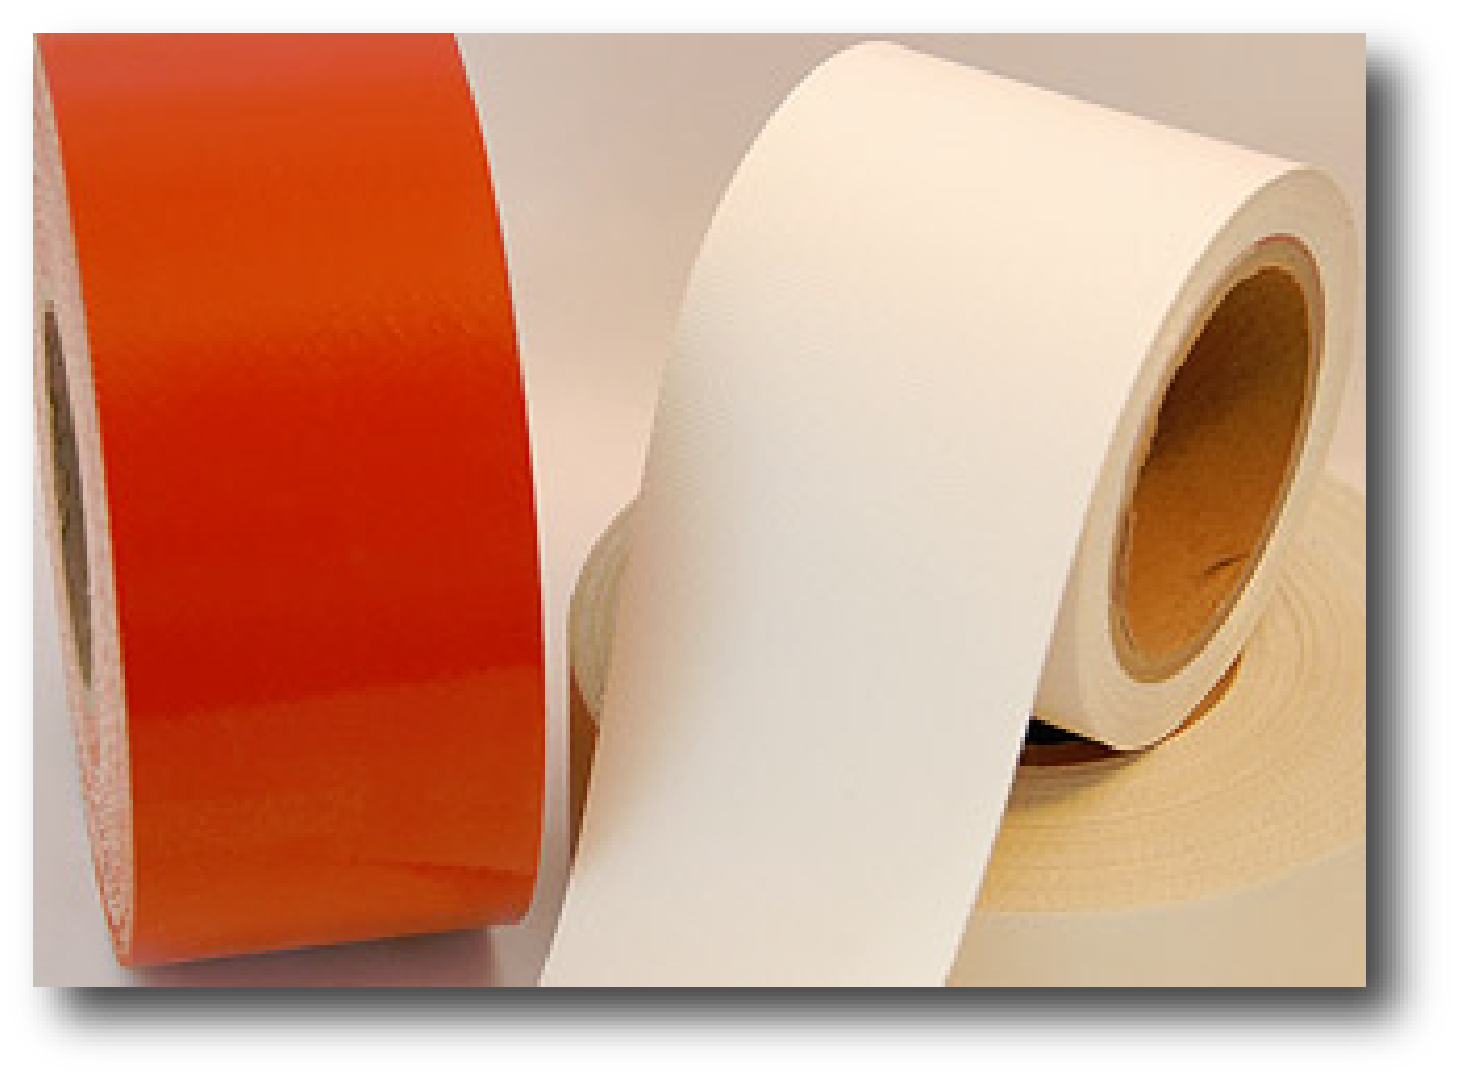 Taconic Products Silicone Rubber Coated Fabrics